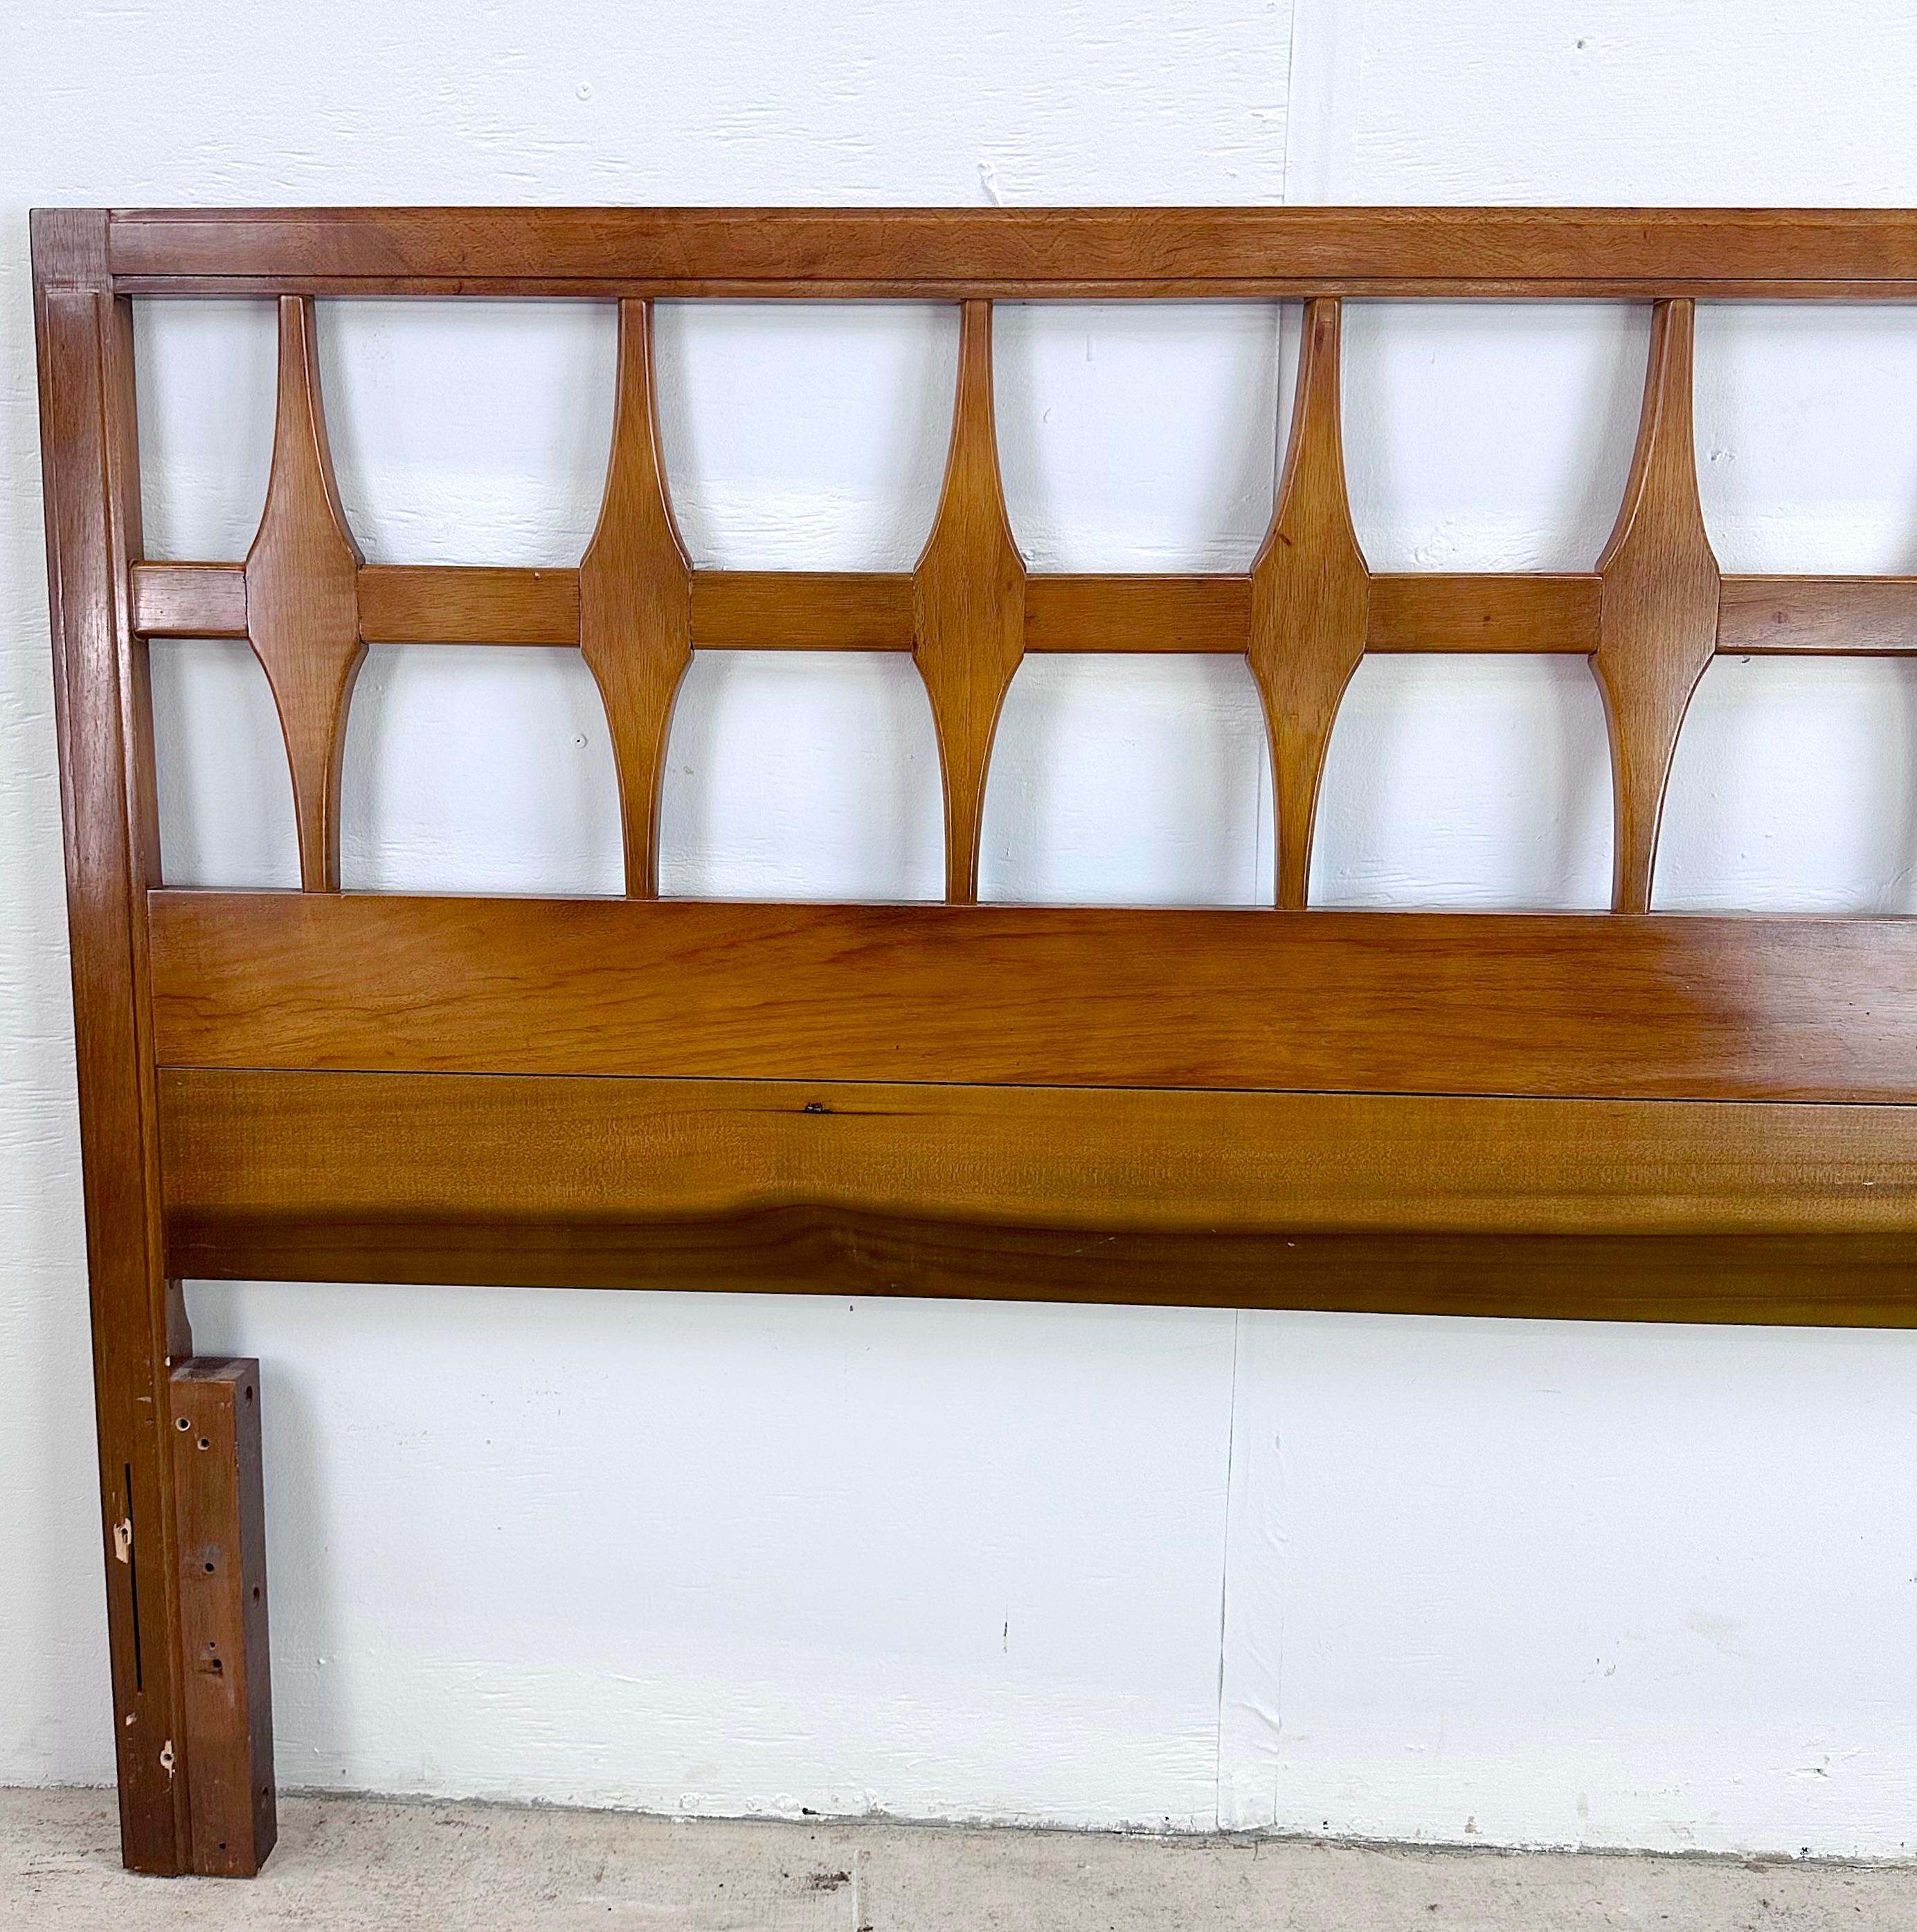 This  mid-century sculptural full size headboard is a tribute to timeless mid-century design tailored to fit your modern full-size bed. Meticulously crafted with attention to detail, this walnut finish headboard brings an air of mid-century